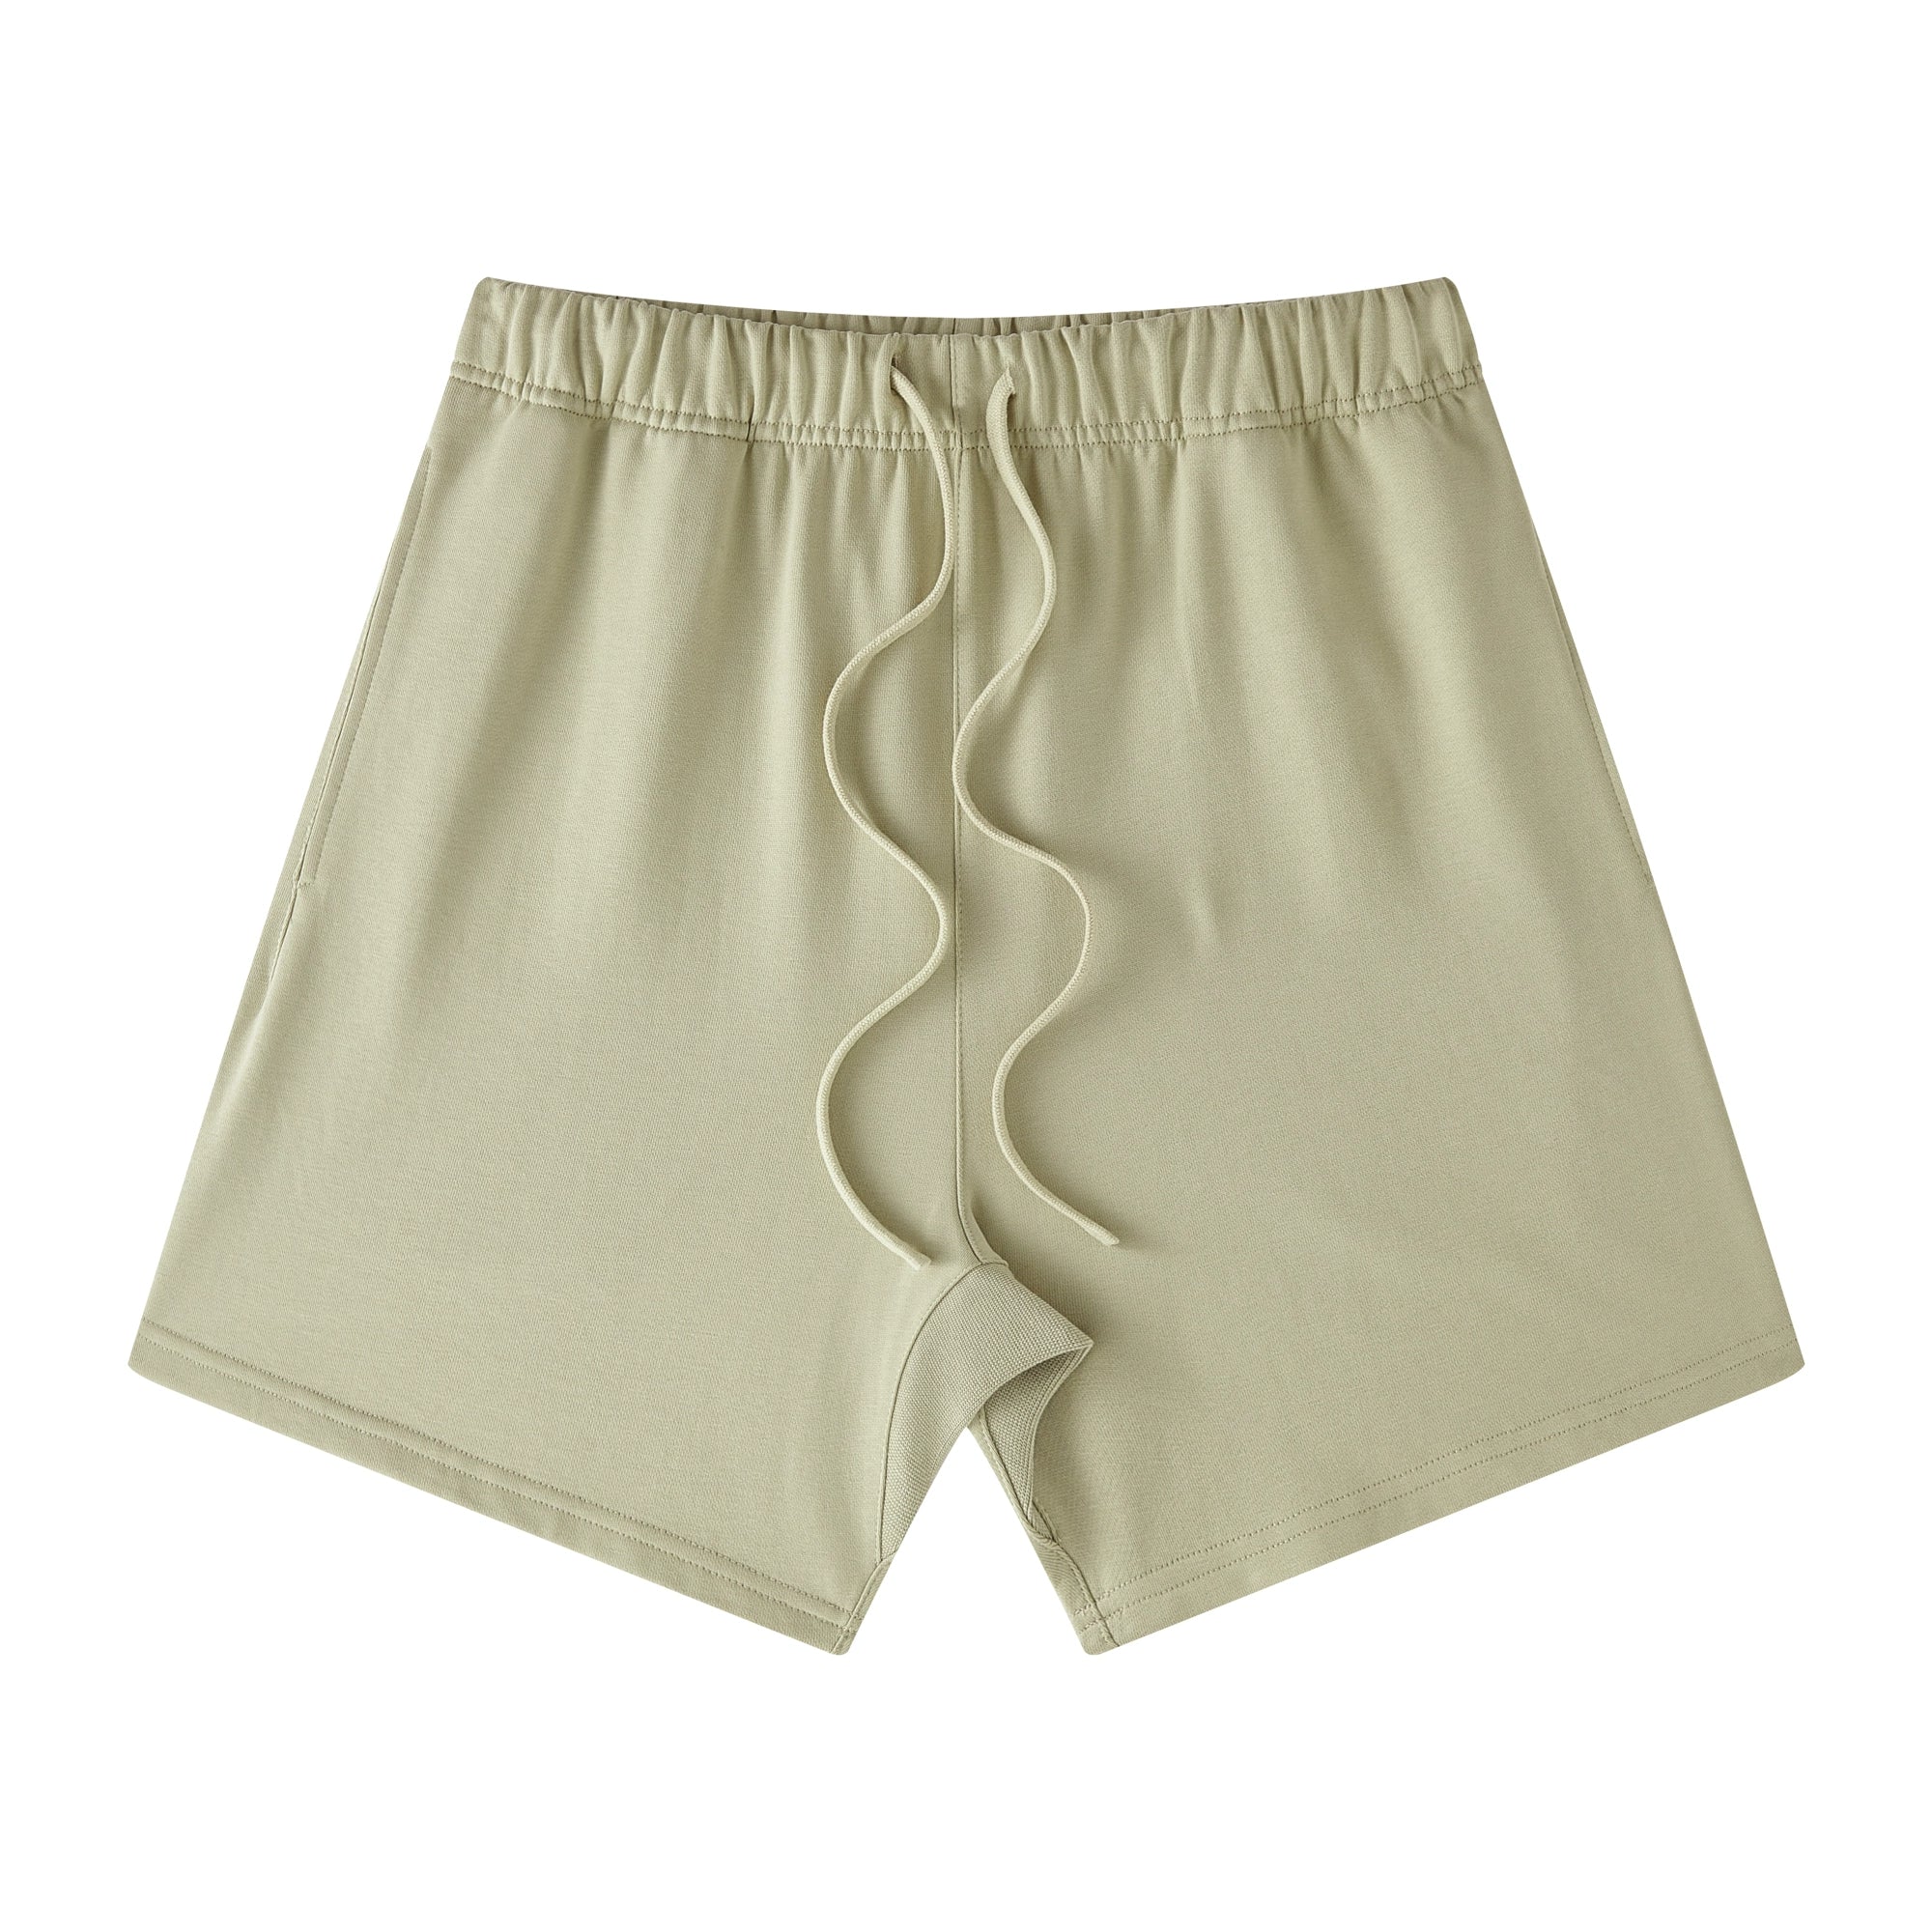 Heavyweight Cotton Essential Shorts with Drawstrings